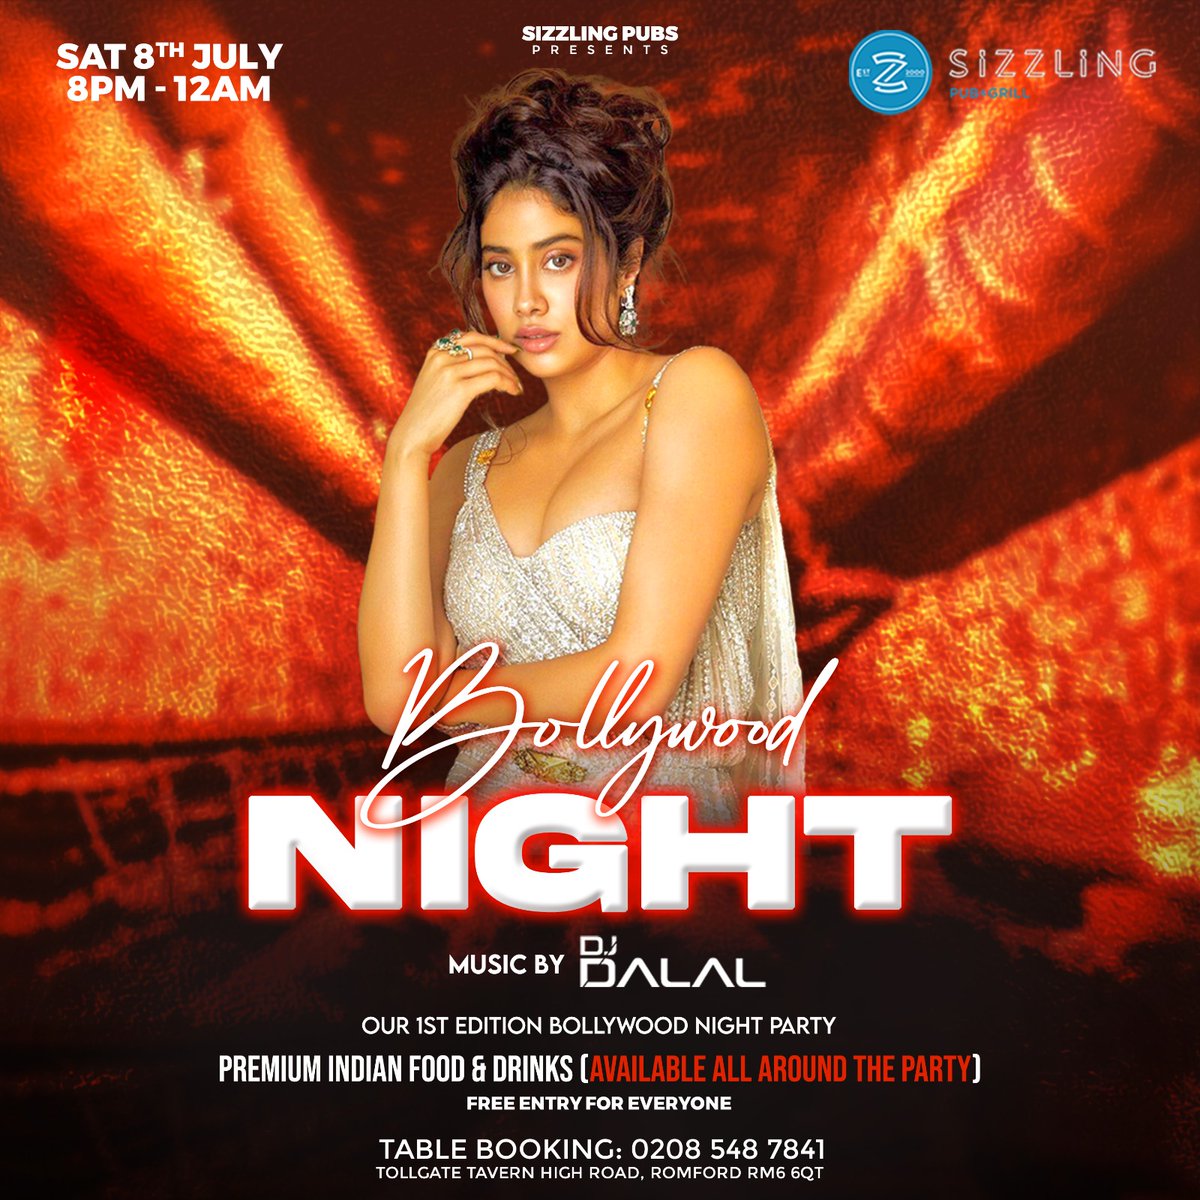 #London see you 8th July #saturday at Sizzling Pub & Grill ♥️
Event by Sizzling Pub & Grill 

Tickets: eventbrite.com/e/bollywood-ni…

#bollywoodnight #djdalallondon #sizzlingpub&grill #sizzlingpubgrill #sizzlingpubandgrill